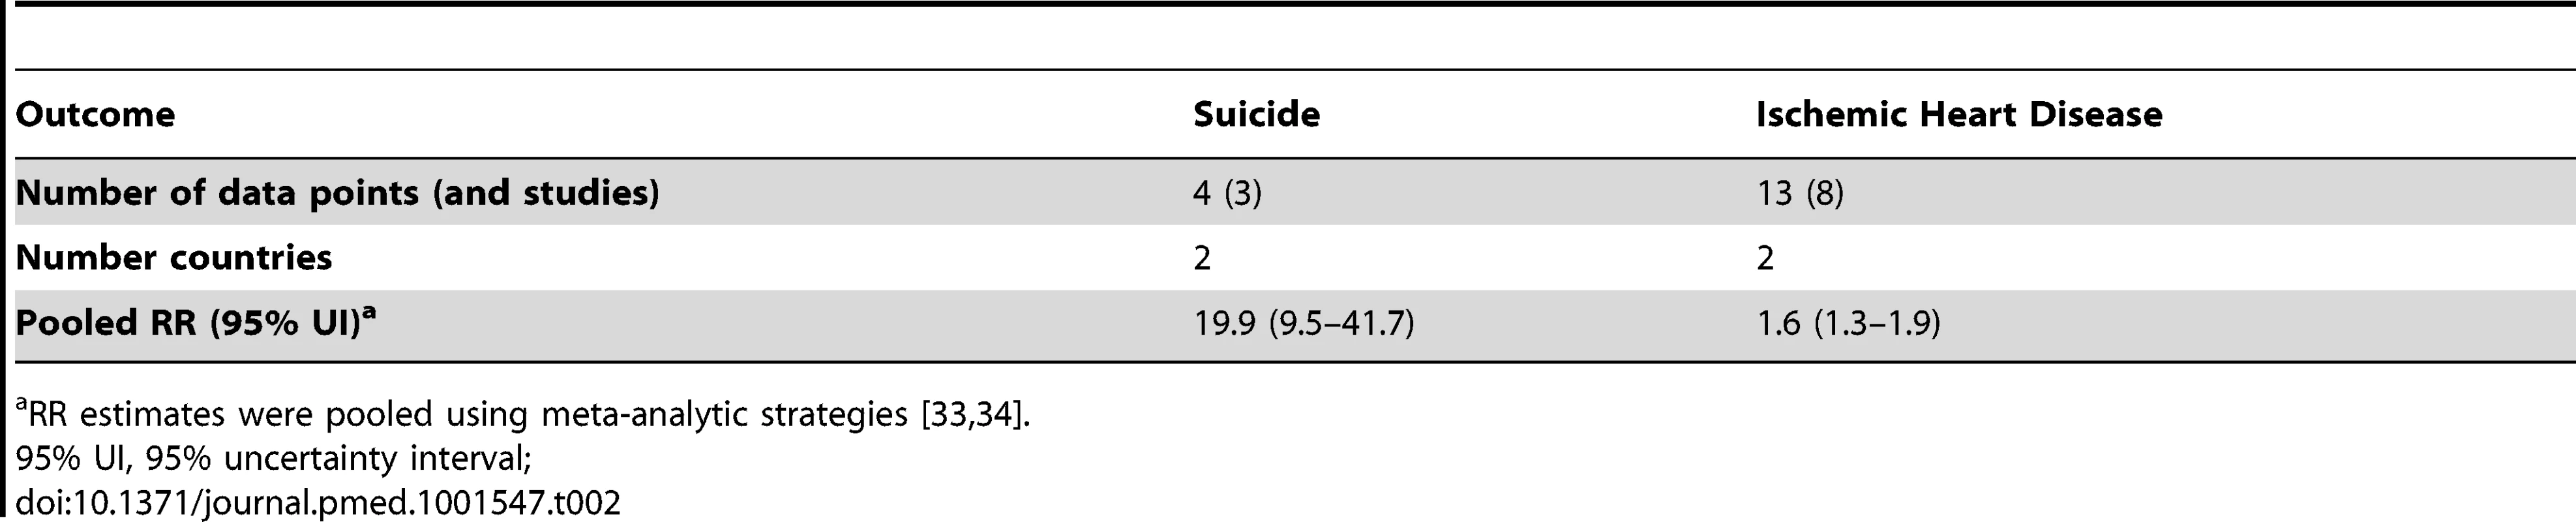 Summary of data used to calculate burden attributable to MDD as a risk factor for suicide and ischemic heart disease.